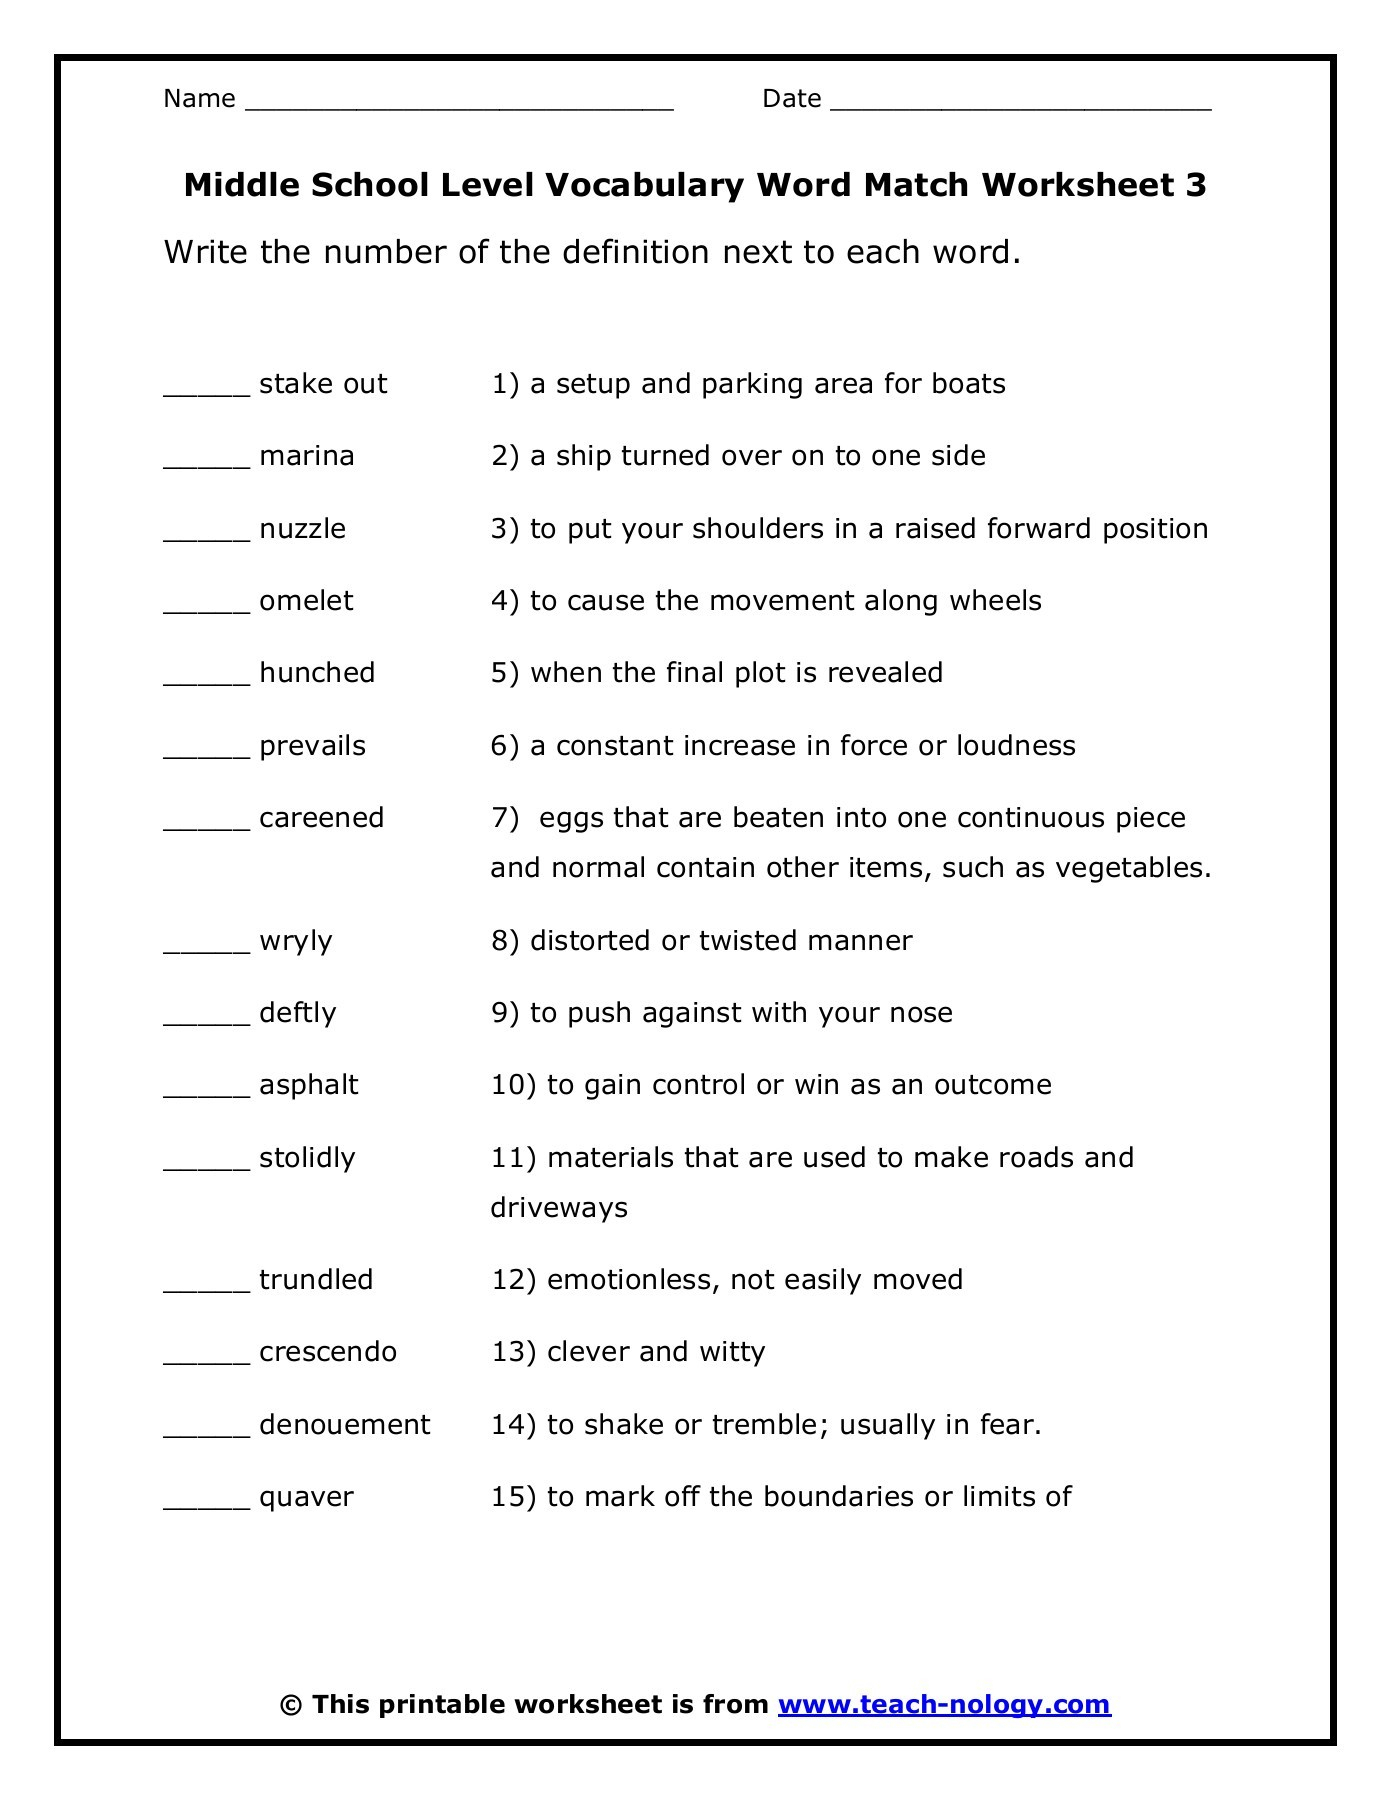 Middle School Level Vocabulary Word Match Worksheet 3